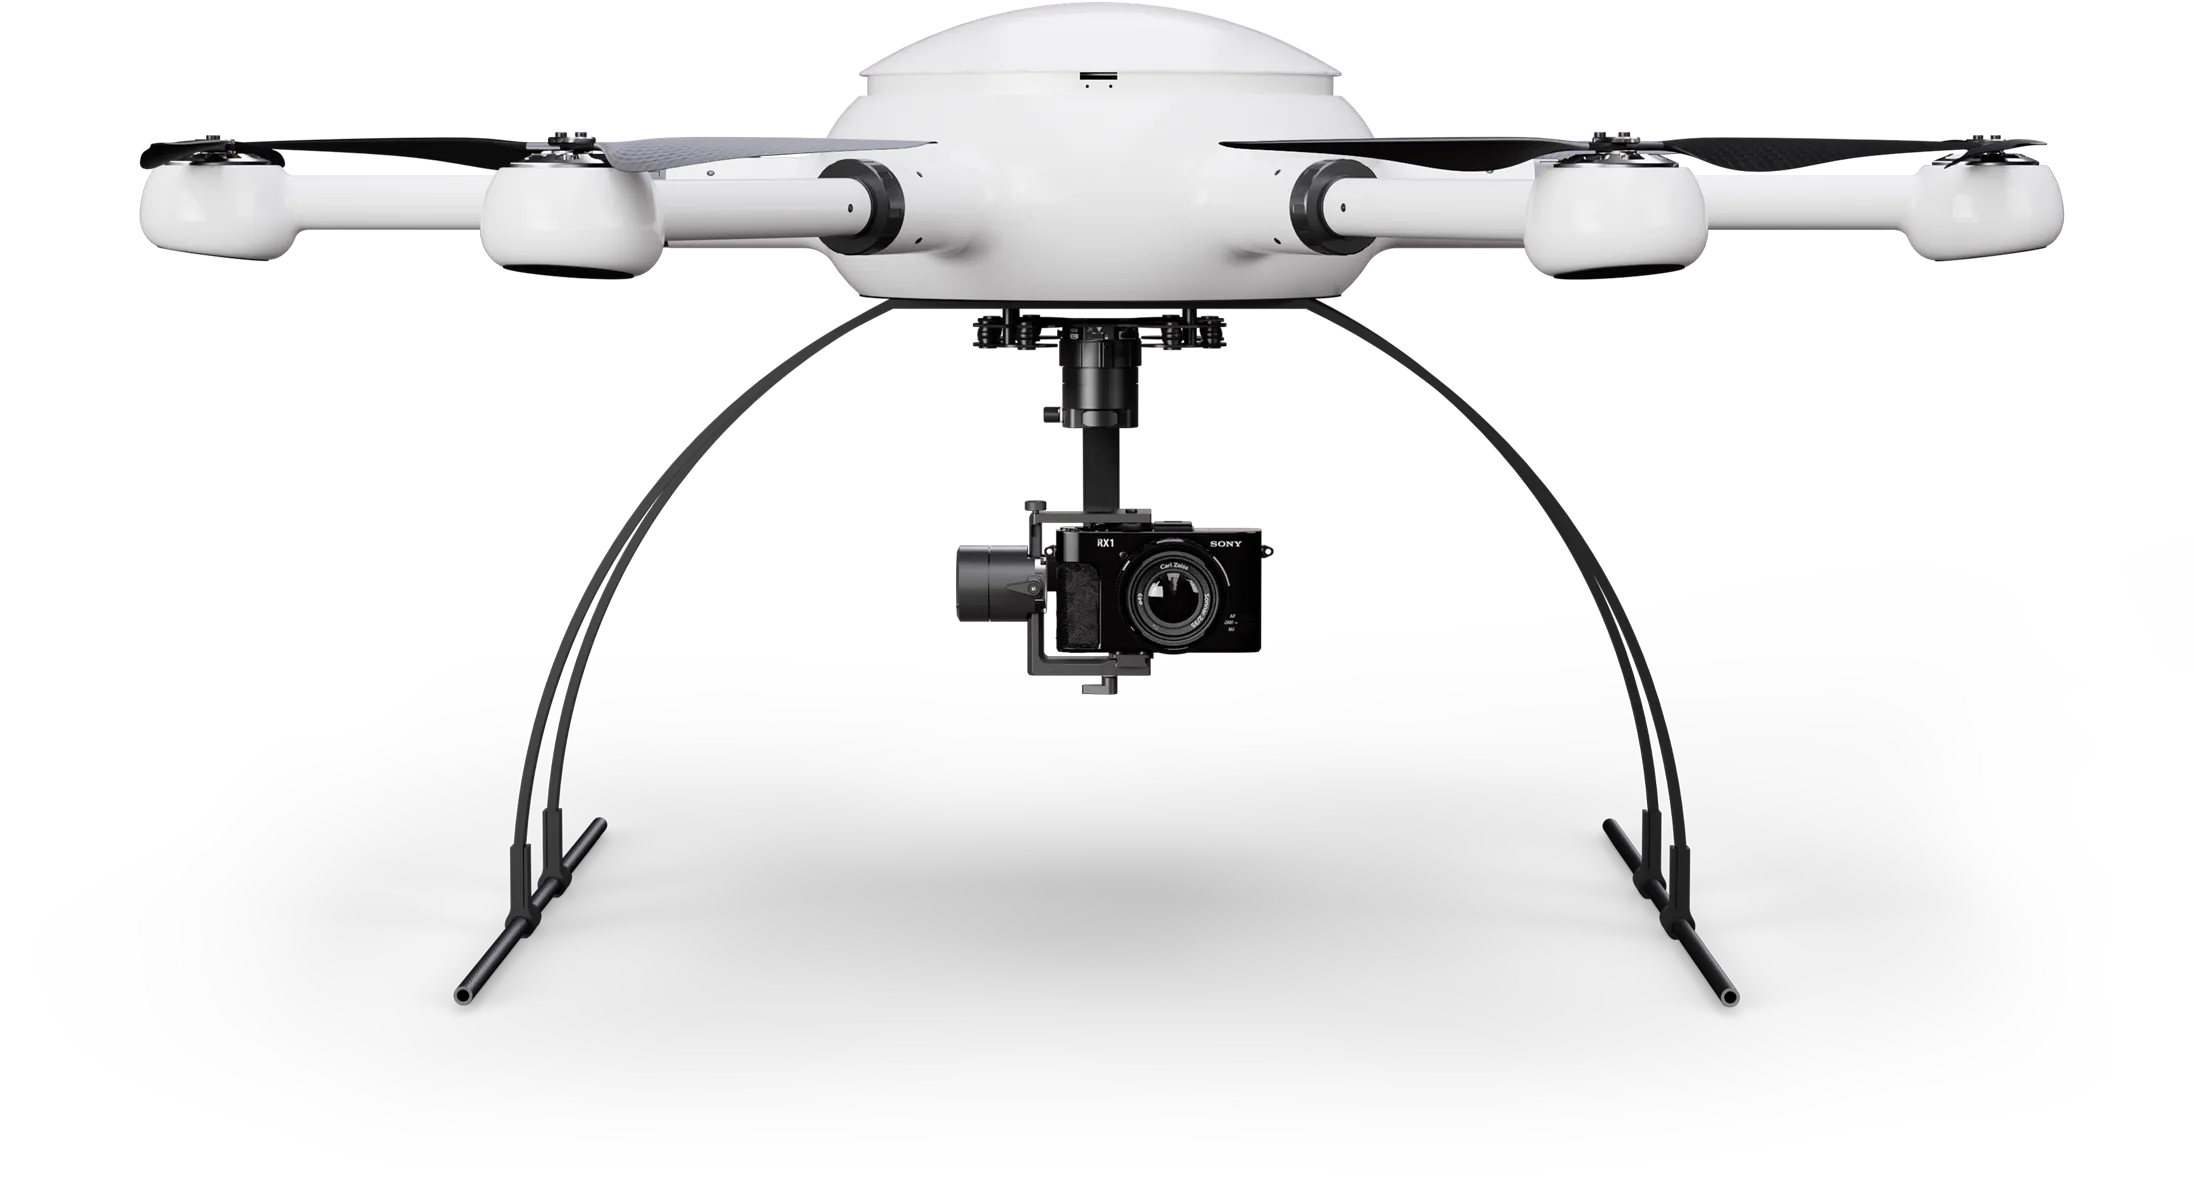 Exabotix Mercury LiDAR Industrial drone front view with LiDAR scanner for precise 3D scanning and surveying tasks.